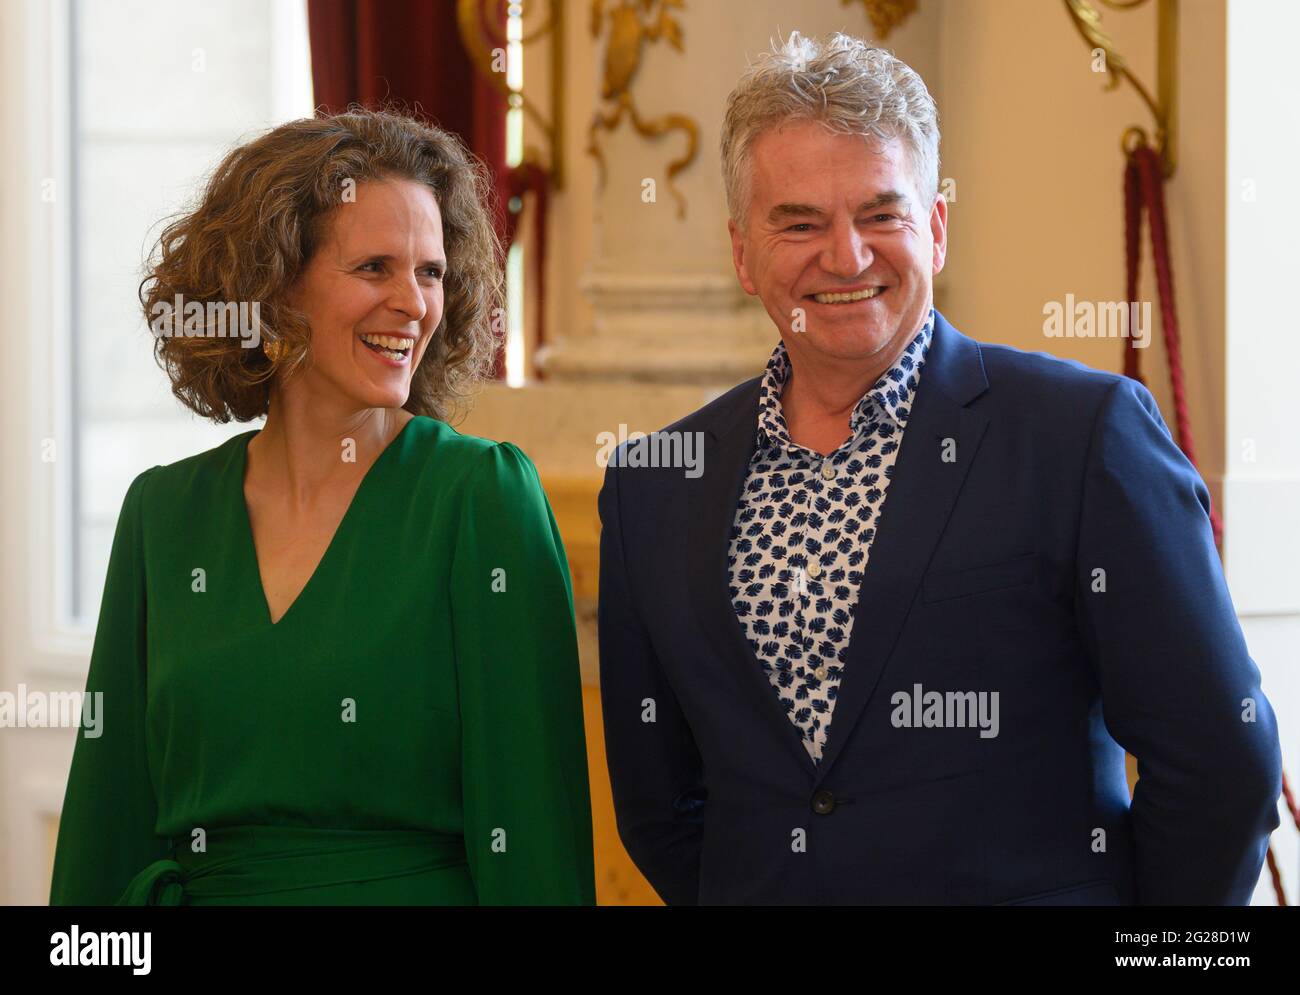 Dresden, Germany. 08th June, 2021. Nora Schmid (l), artistic director of the Graz Opera, stands next to Wolfgang Rothe, commercial director of the Semperoper, after a press conference at the Semperoper. The Swiss will take over as director of the Saxon State Opera Dresden from the 2024/2025 season. Credit: Robert Michael/dpa-Zentralbild/ZB/dpa/Alamy Live News Stock Photo